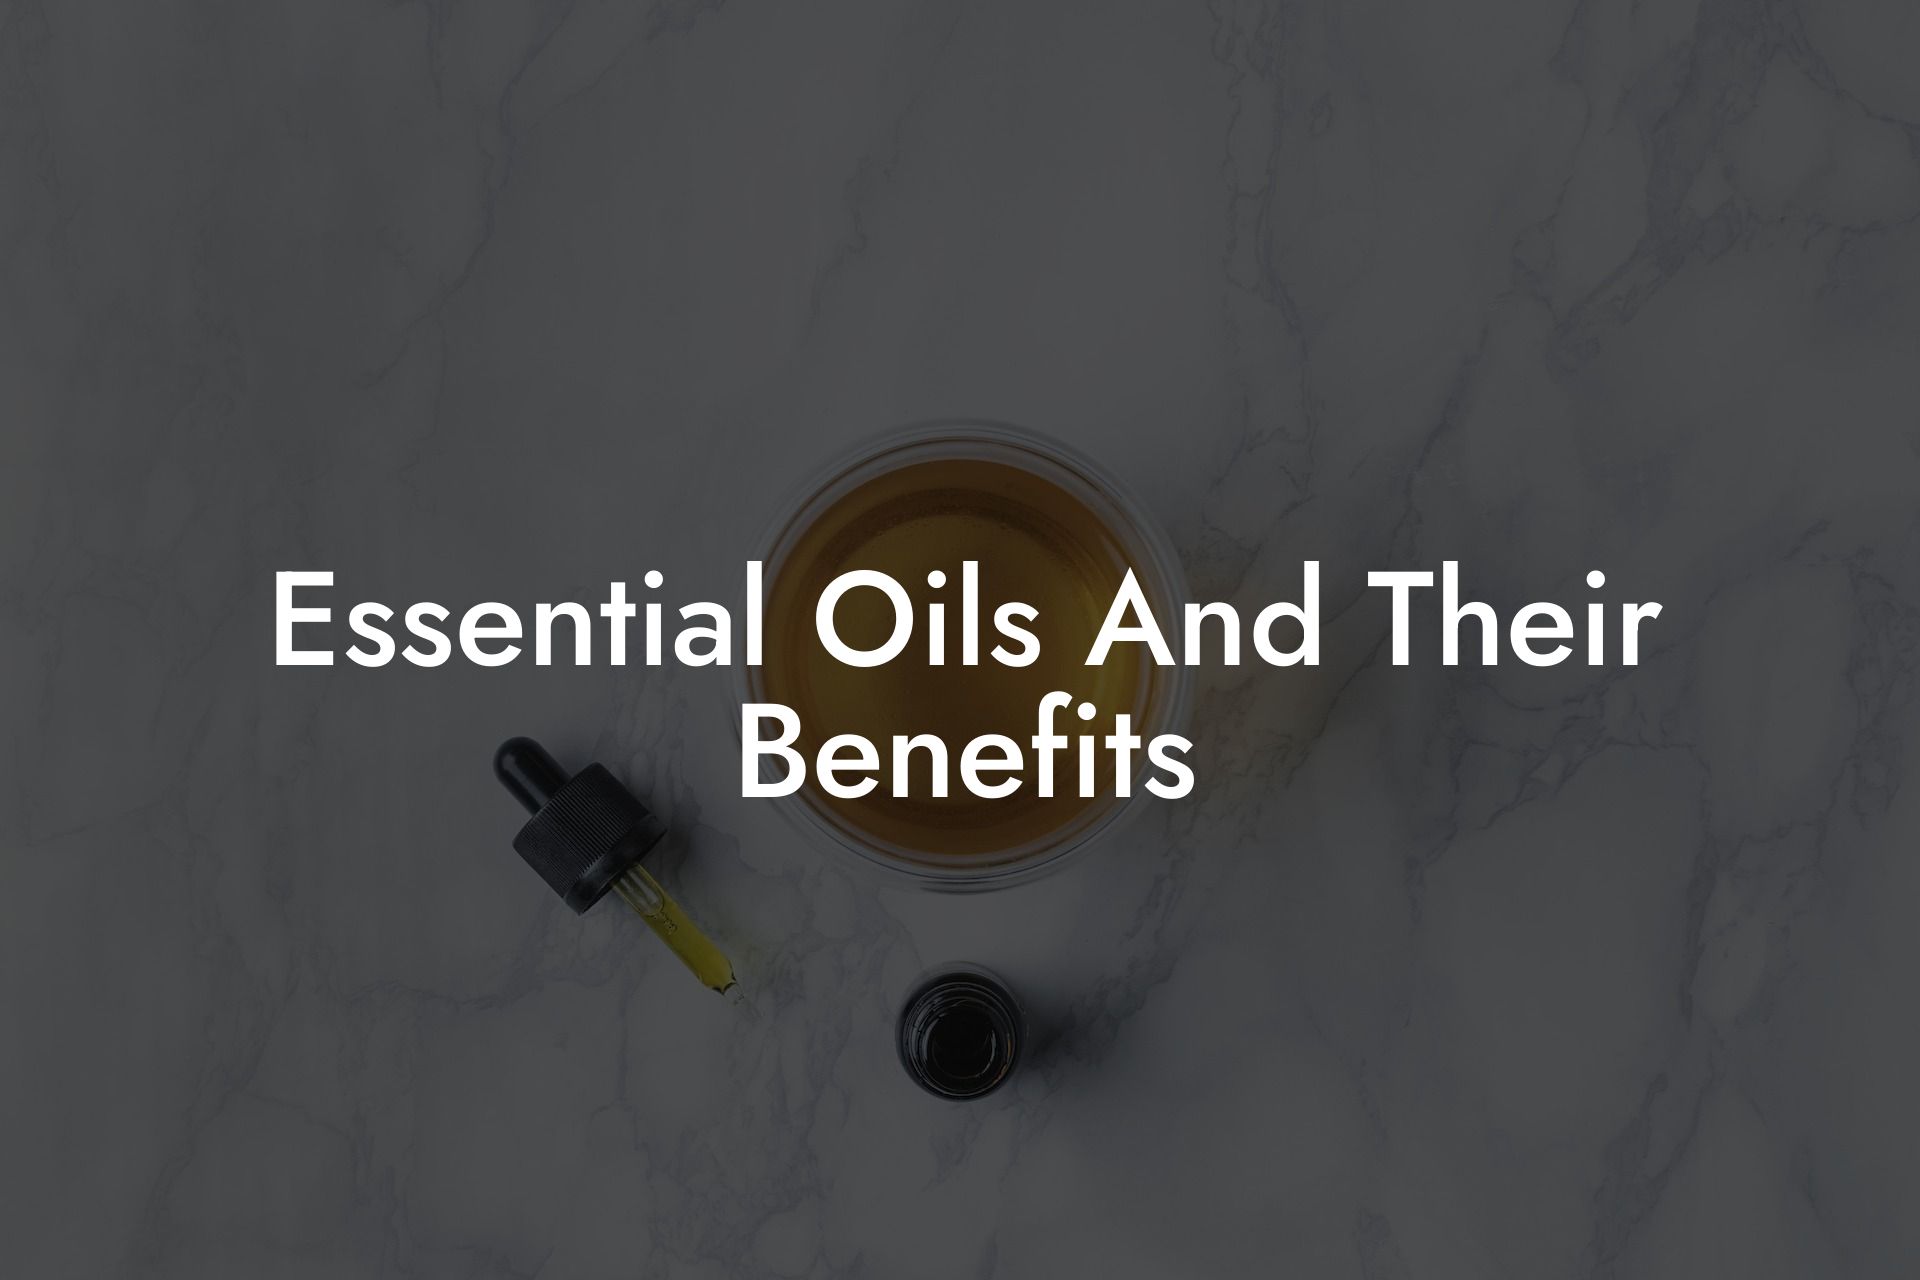 Essential Oils And Their Benefits